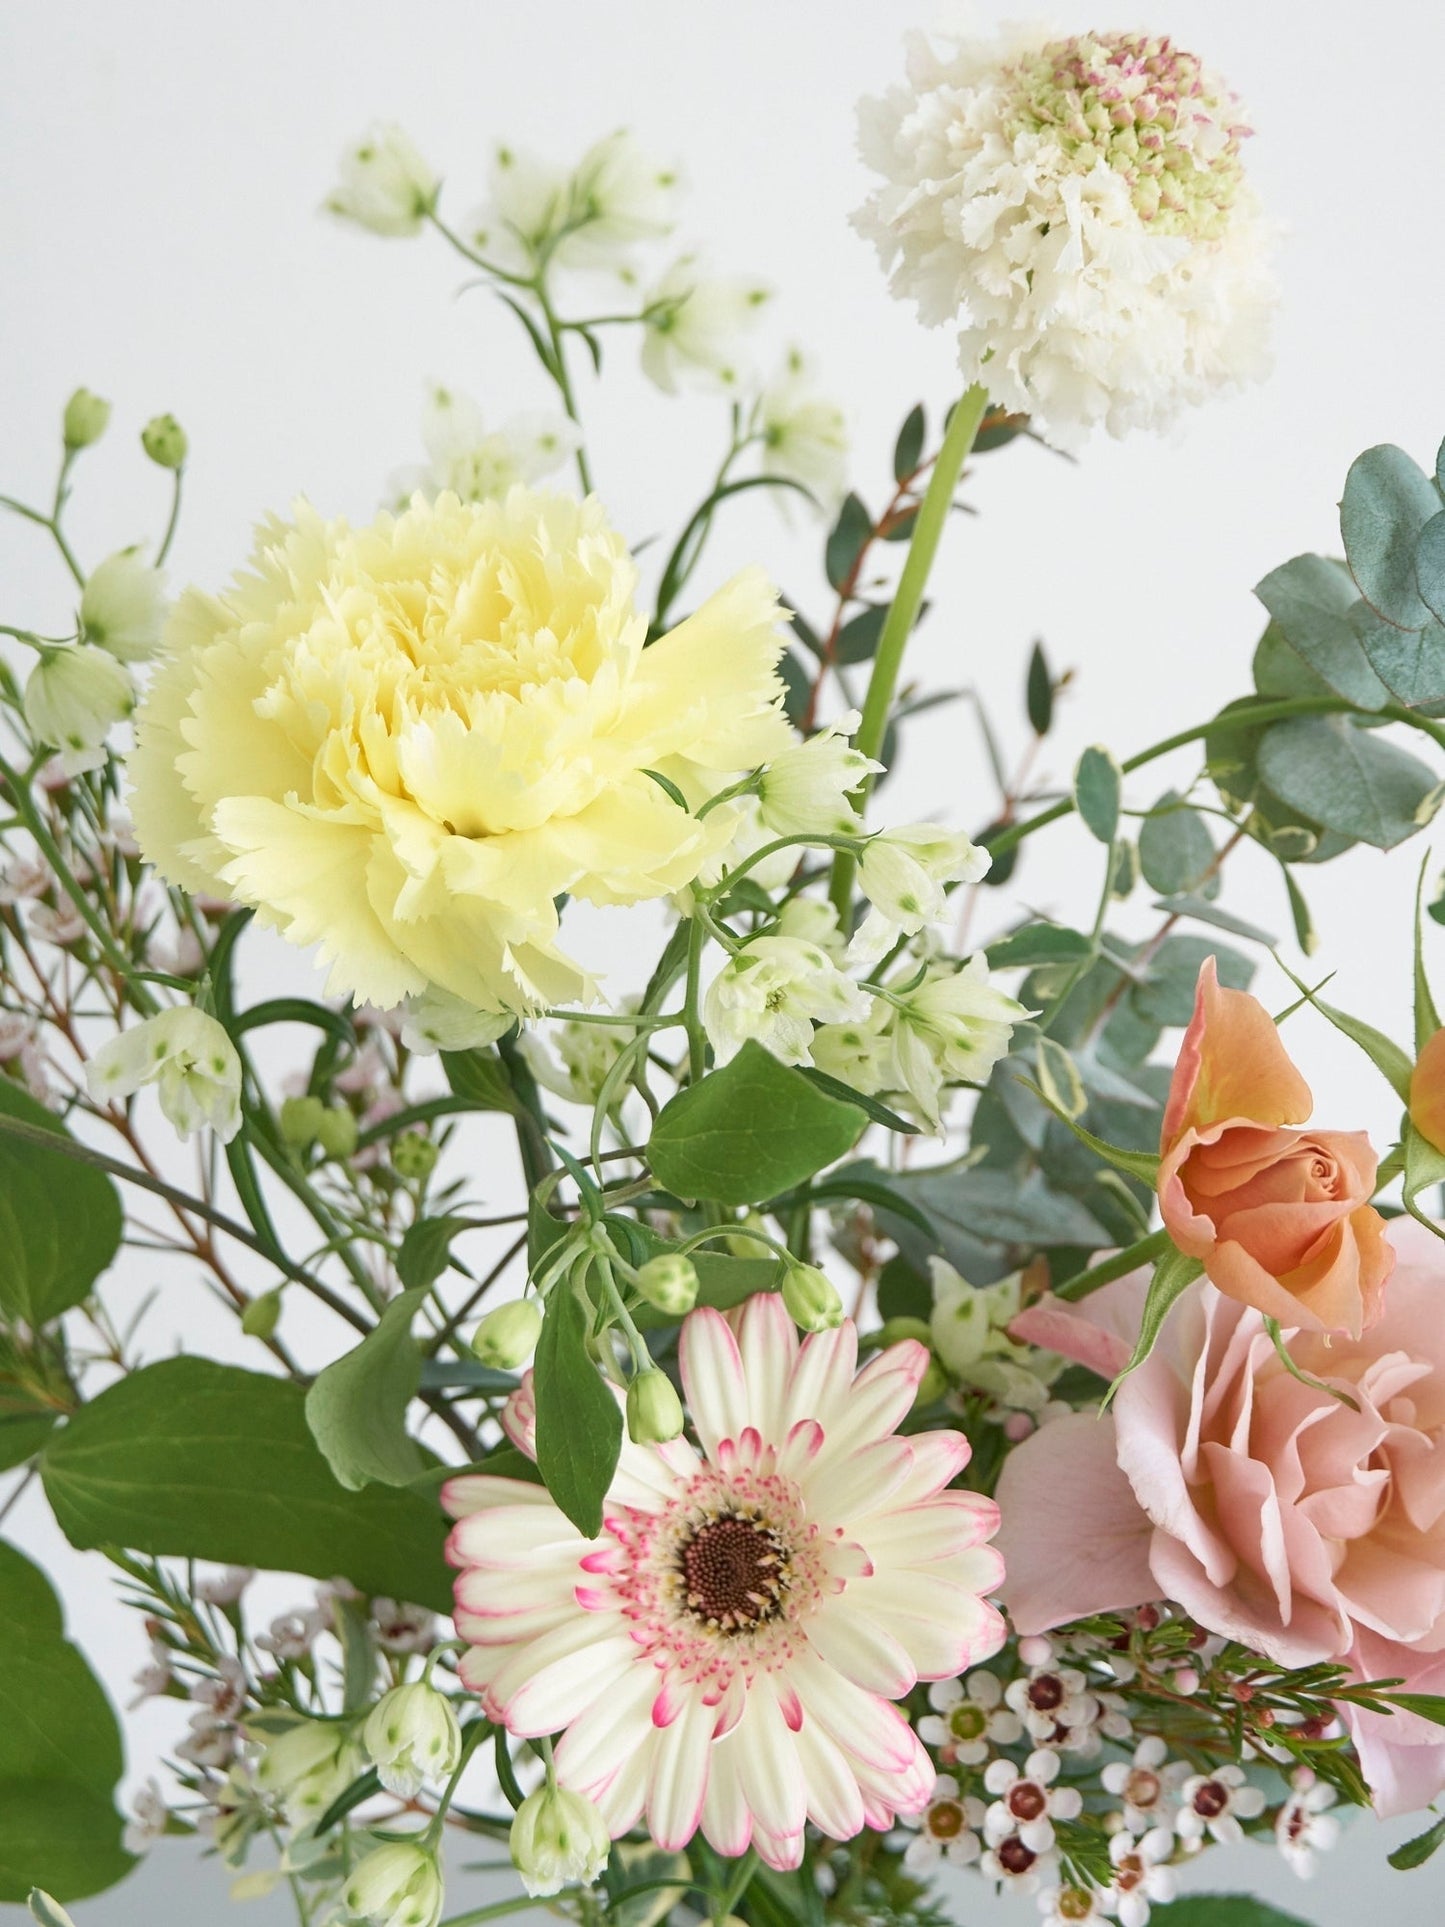 【mother's day】Set of bouquet S and clear vase 【Delivery date: 5/11 (Sat)】